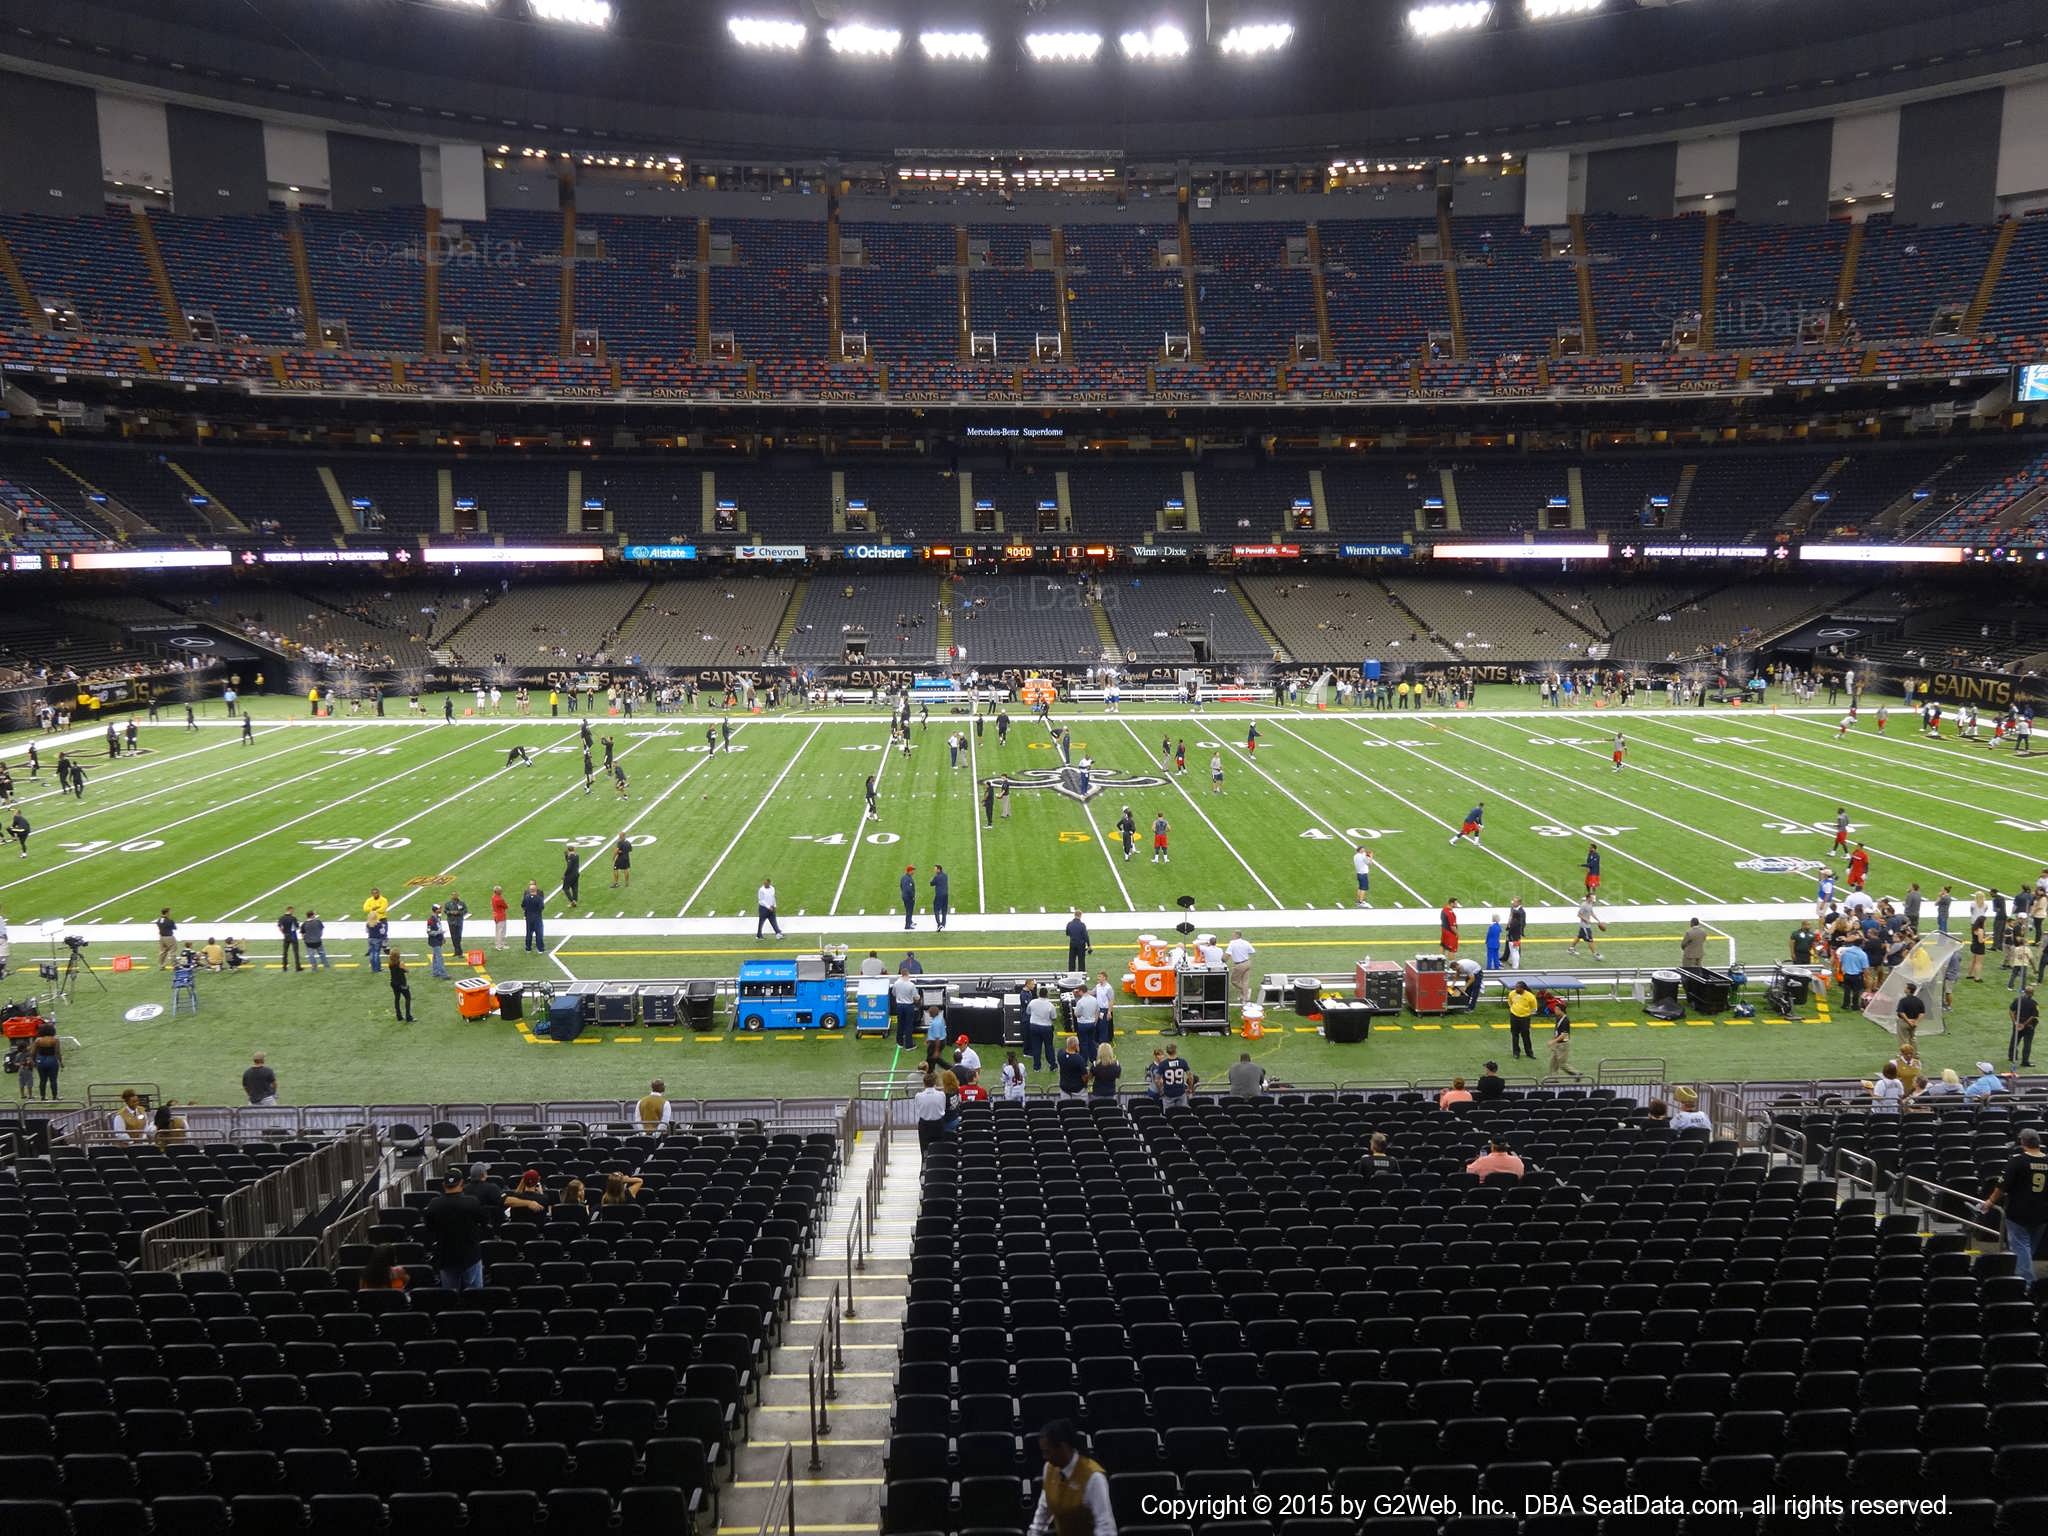 Seat view from section 223 at the Mercedes-Benz Superdome, home of the New Orleans Saints